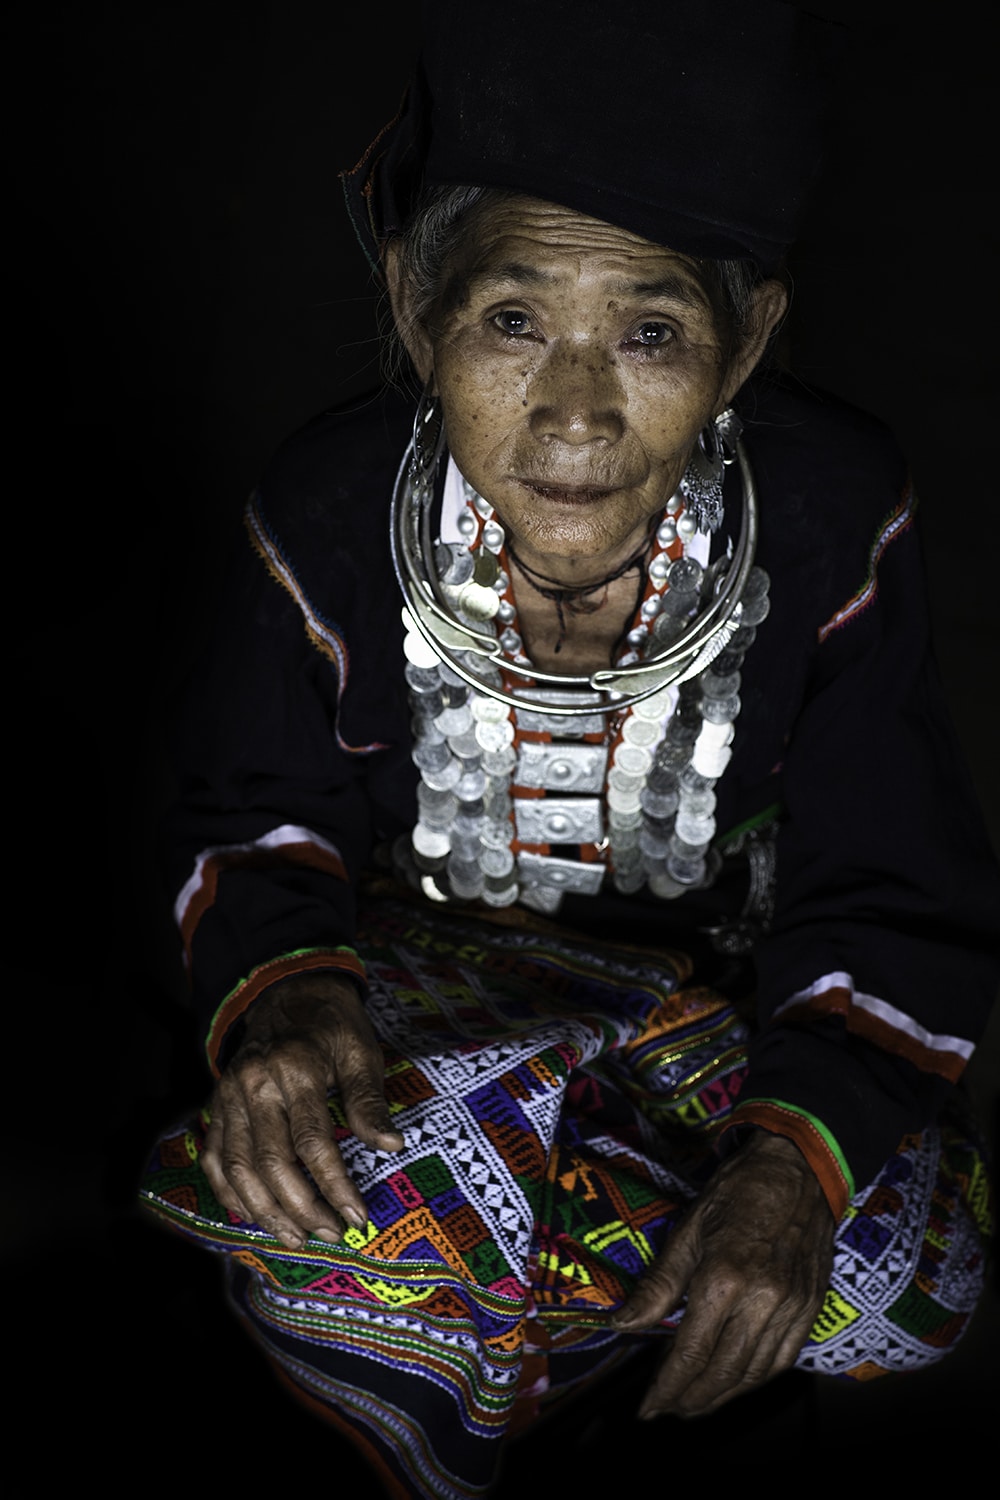 Portrait of woman from Kho Mu Ethnic Tribe in Vietnam by Réhahn